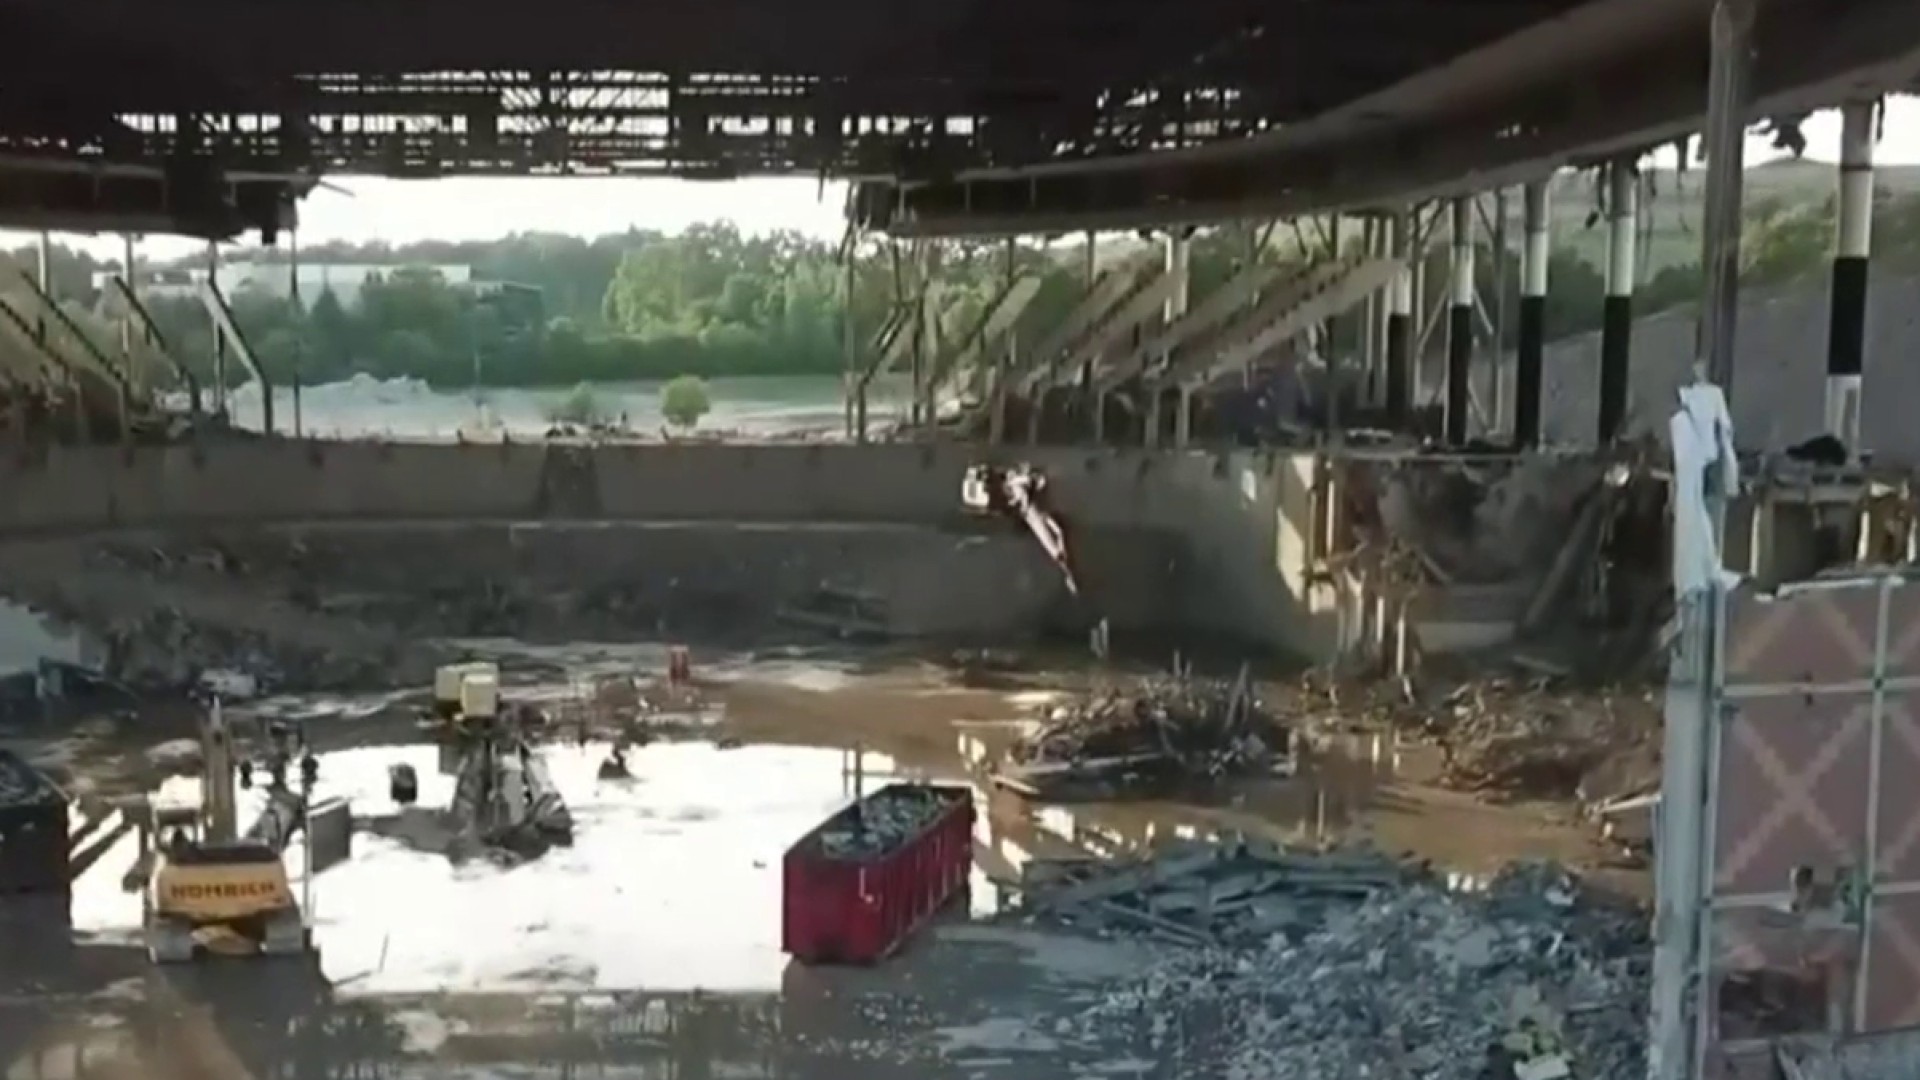 VIDEO: What's left of the Palace of Auburn Hills